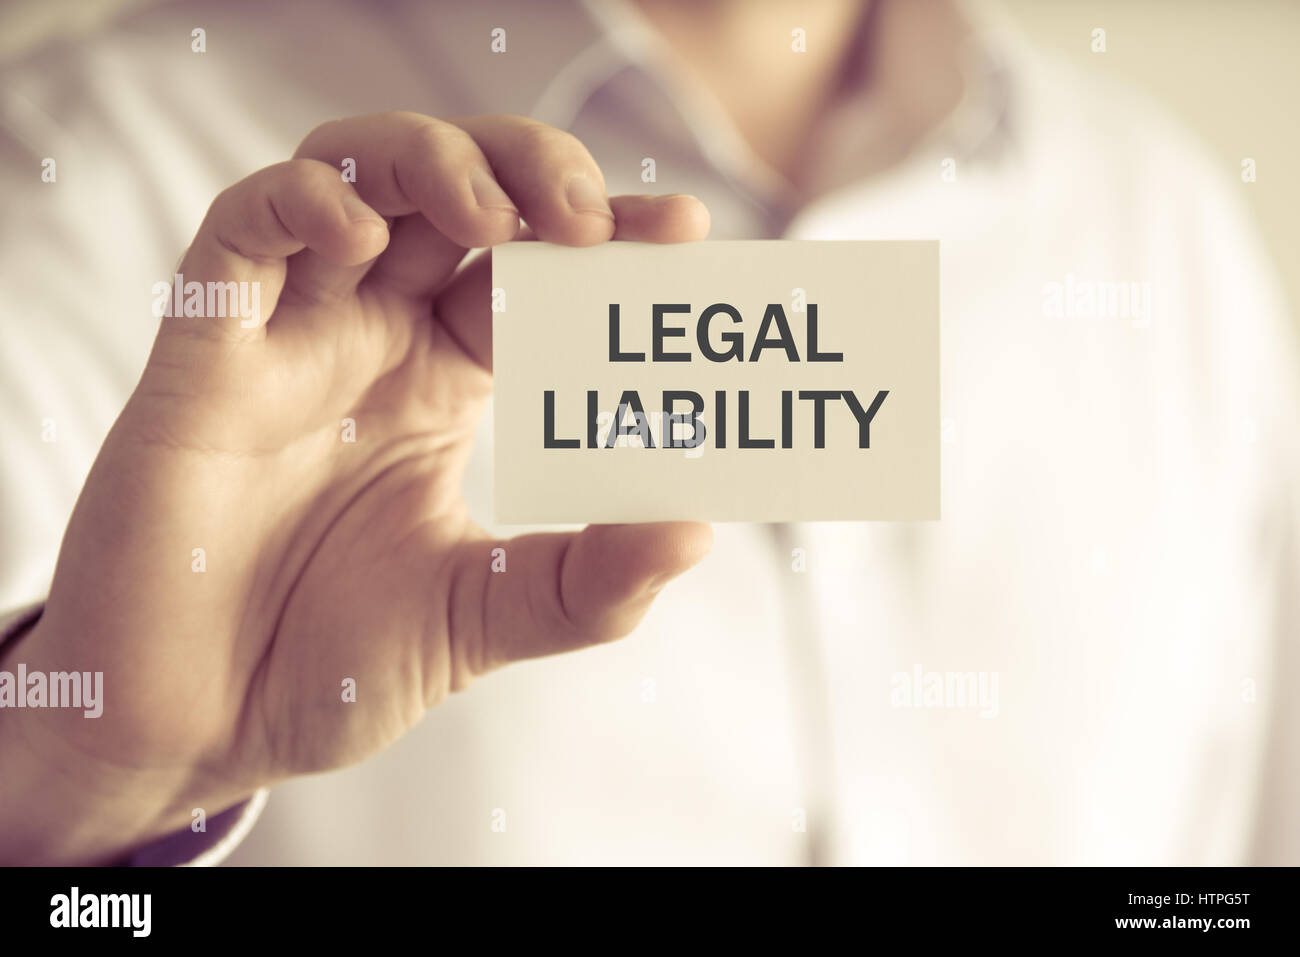 Closeup on businessman holding a card with text LEGAL LIABILITY, business concept image with soft focus background and vintage tone Stock Photo